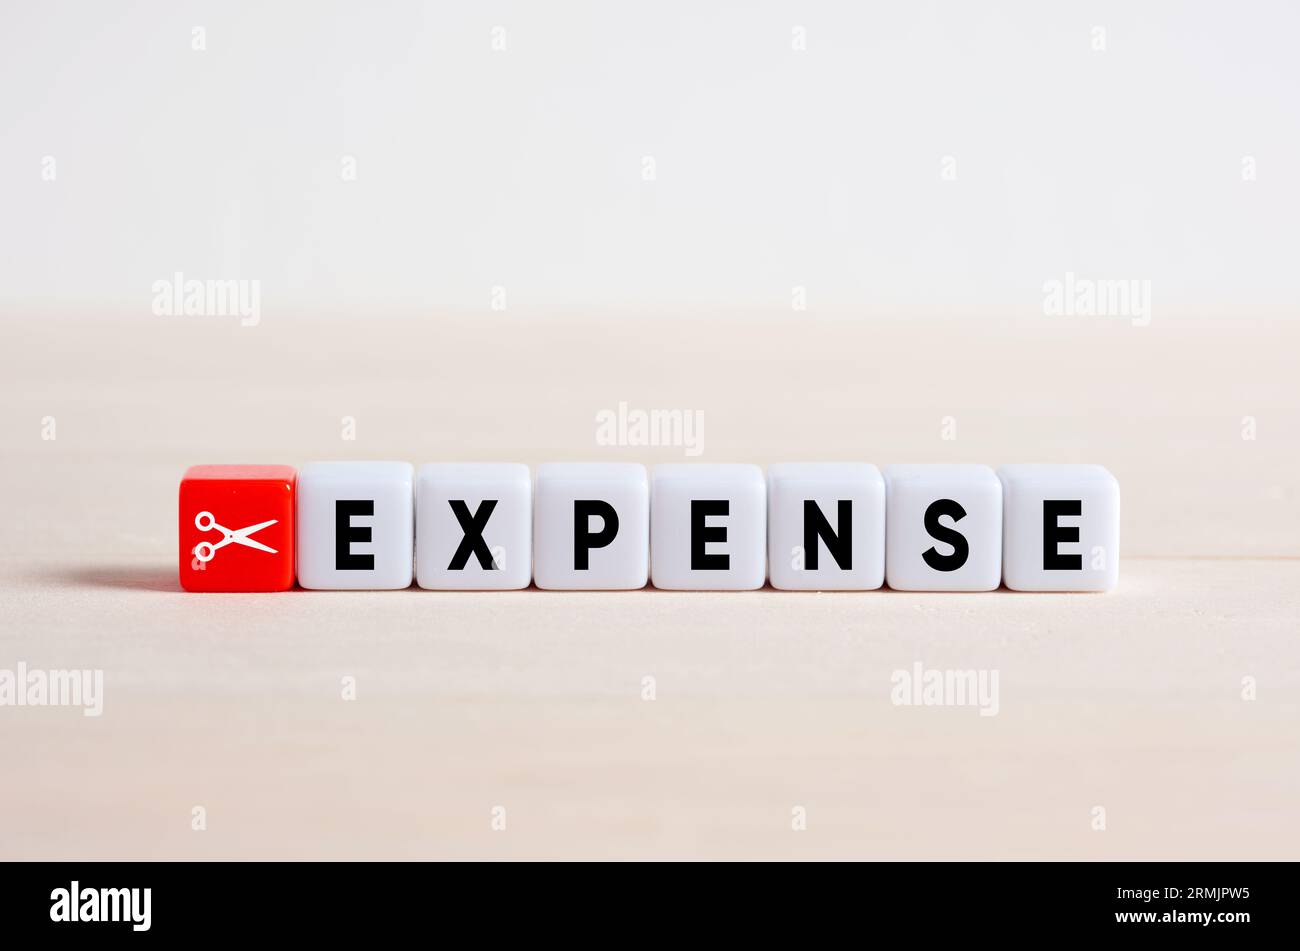 Cutting expenses and costs. Expense reduction and financial stability. Scissors icon and the word expense on cubes. Stock Photo